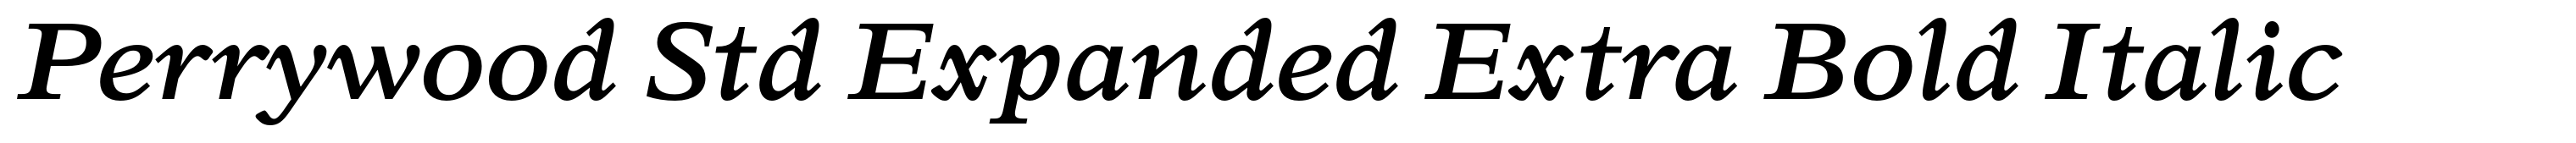 Perrywood Std Expanded Extra Bold Italic